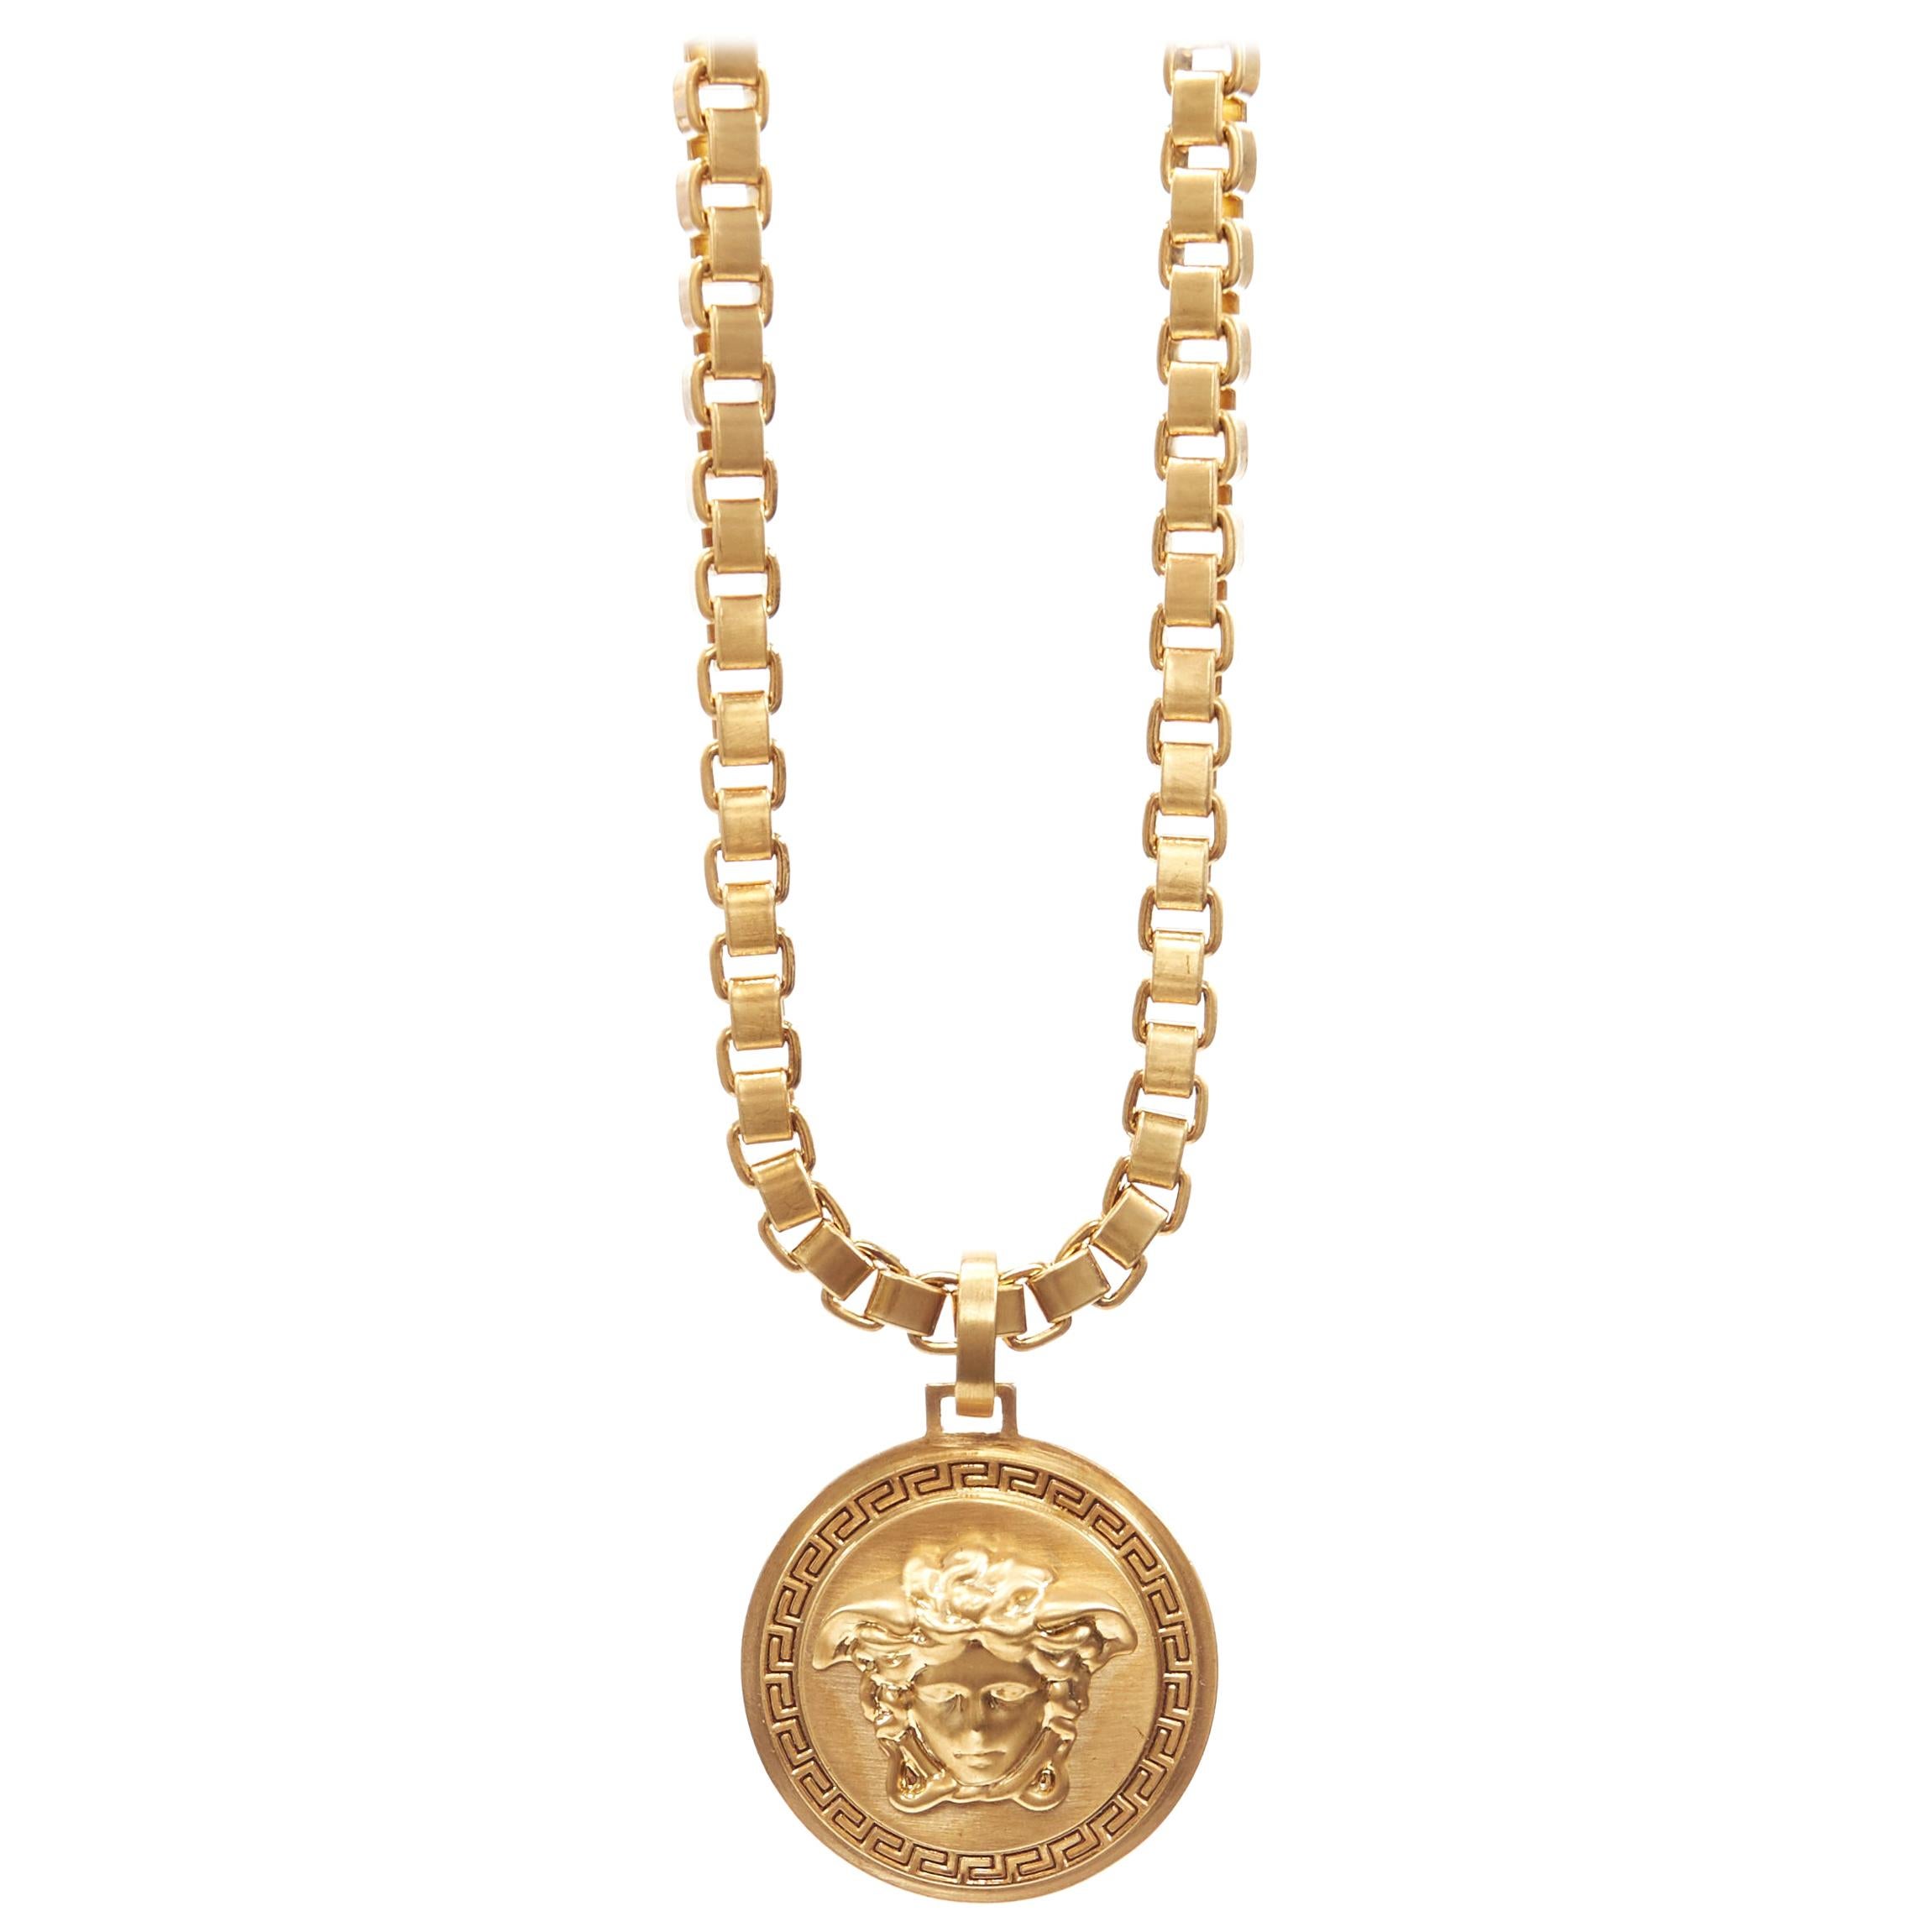 VERSACE Medusa gold Greca medallion coin pendent chunky chain rapper necklace